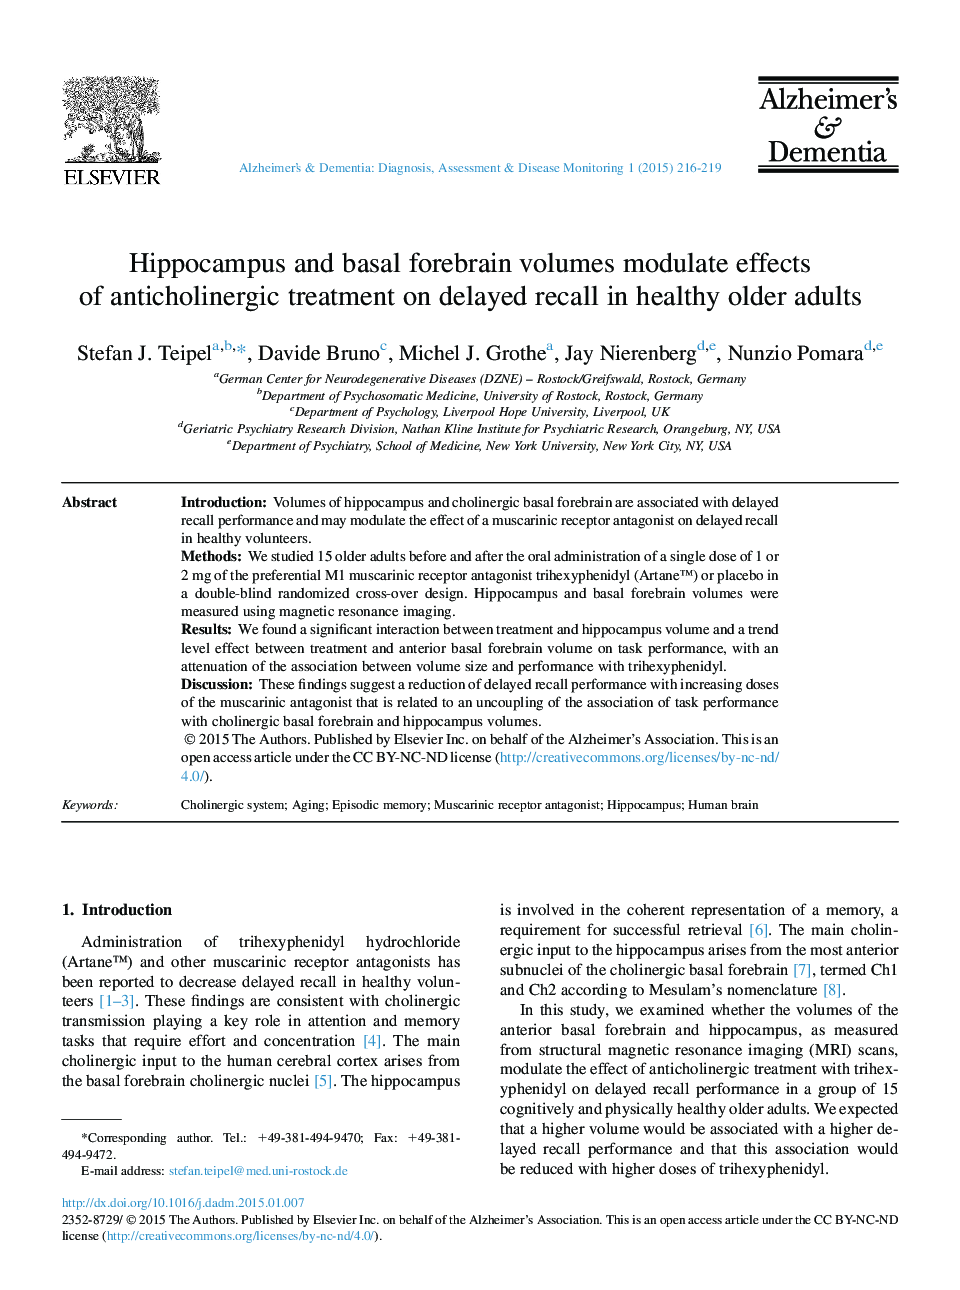 Hippocampus and basal forebrain volumes modulate effects of anticholinergic treatment on delayed recall in healthy older adults